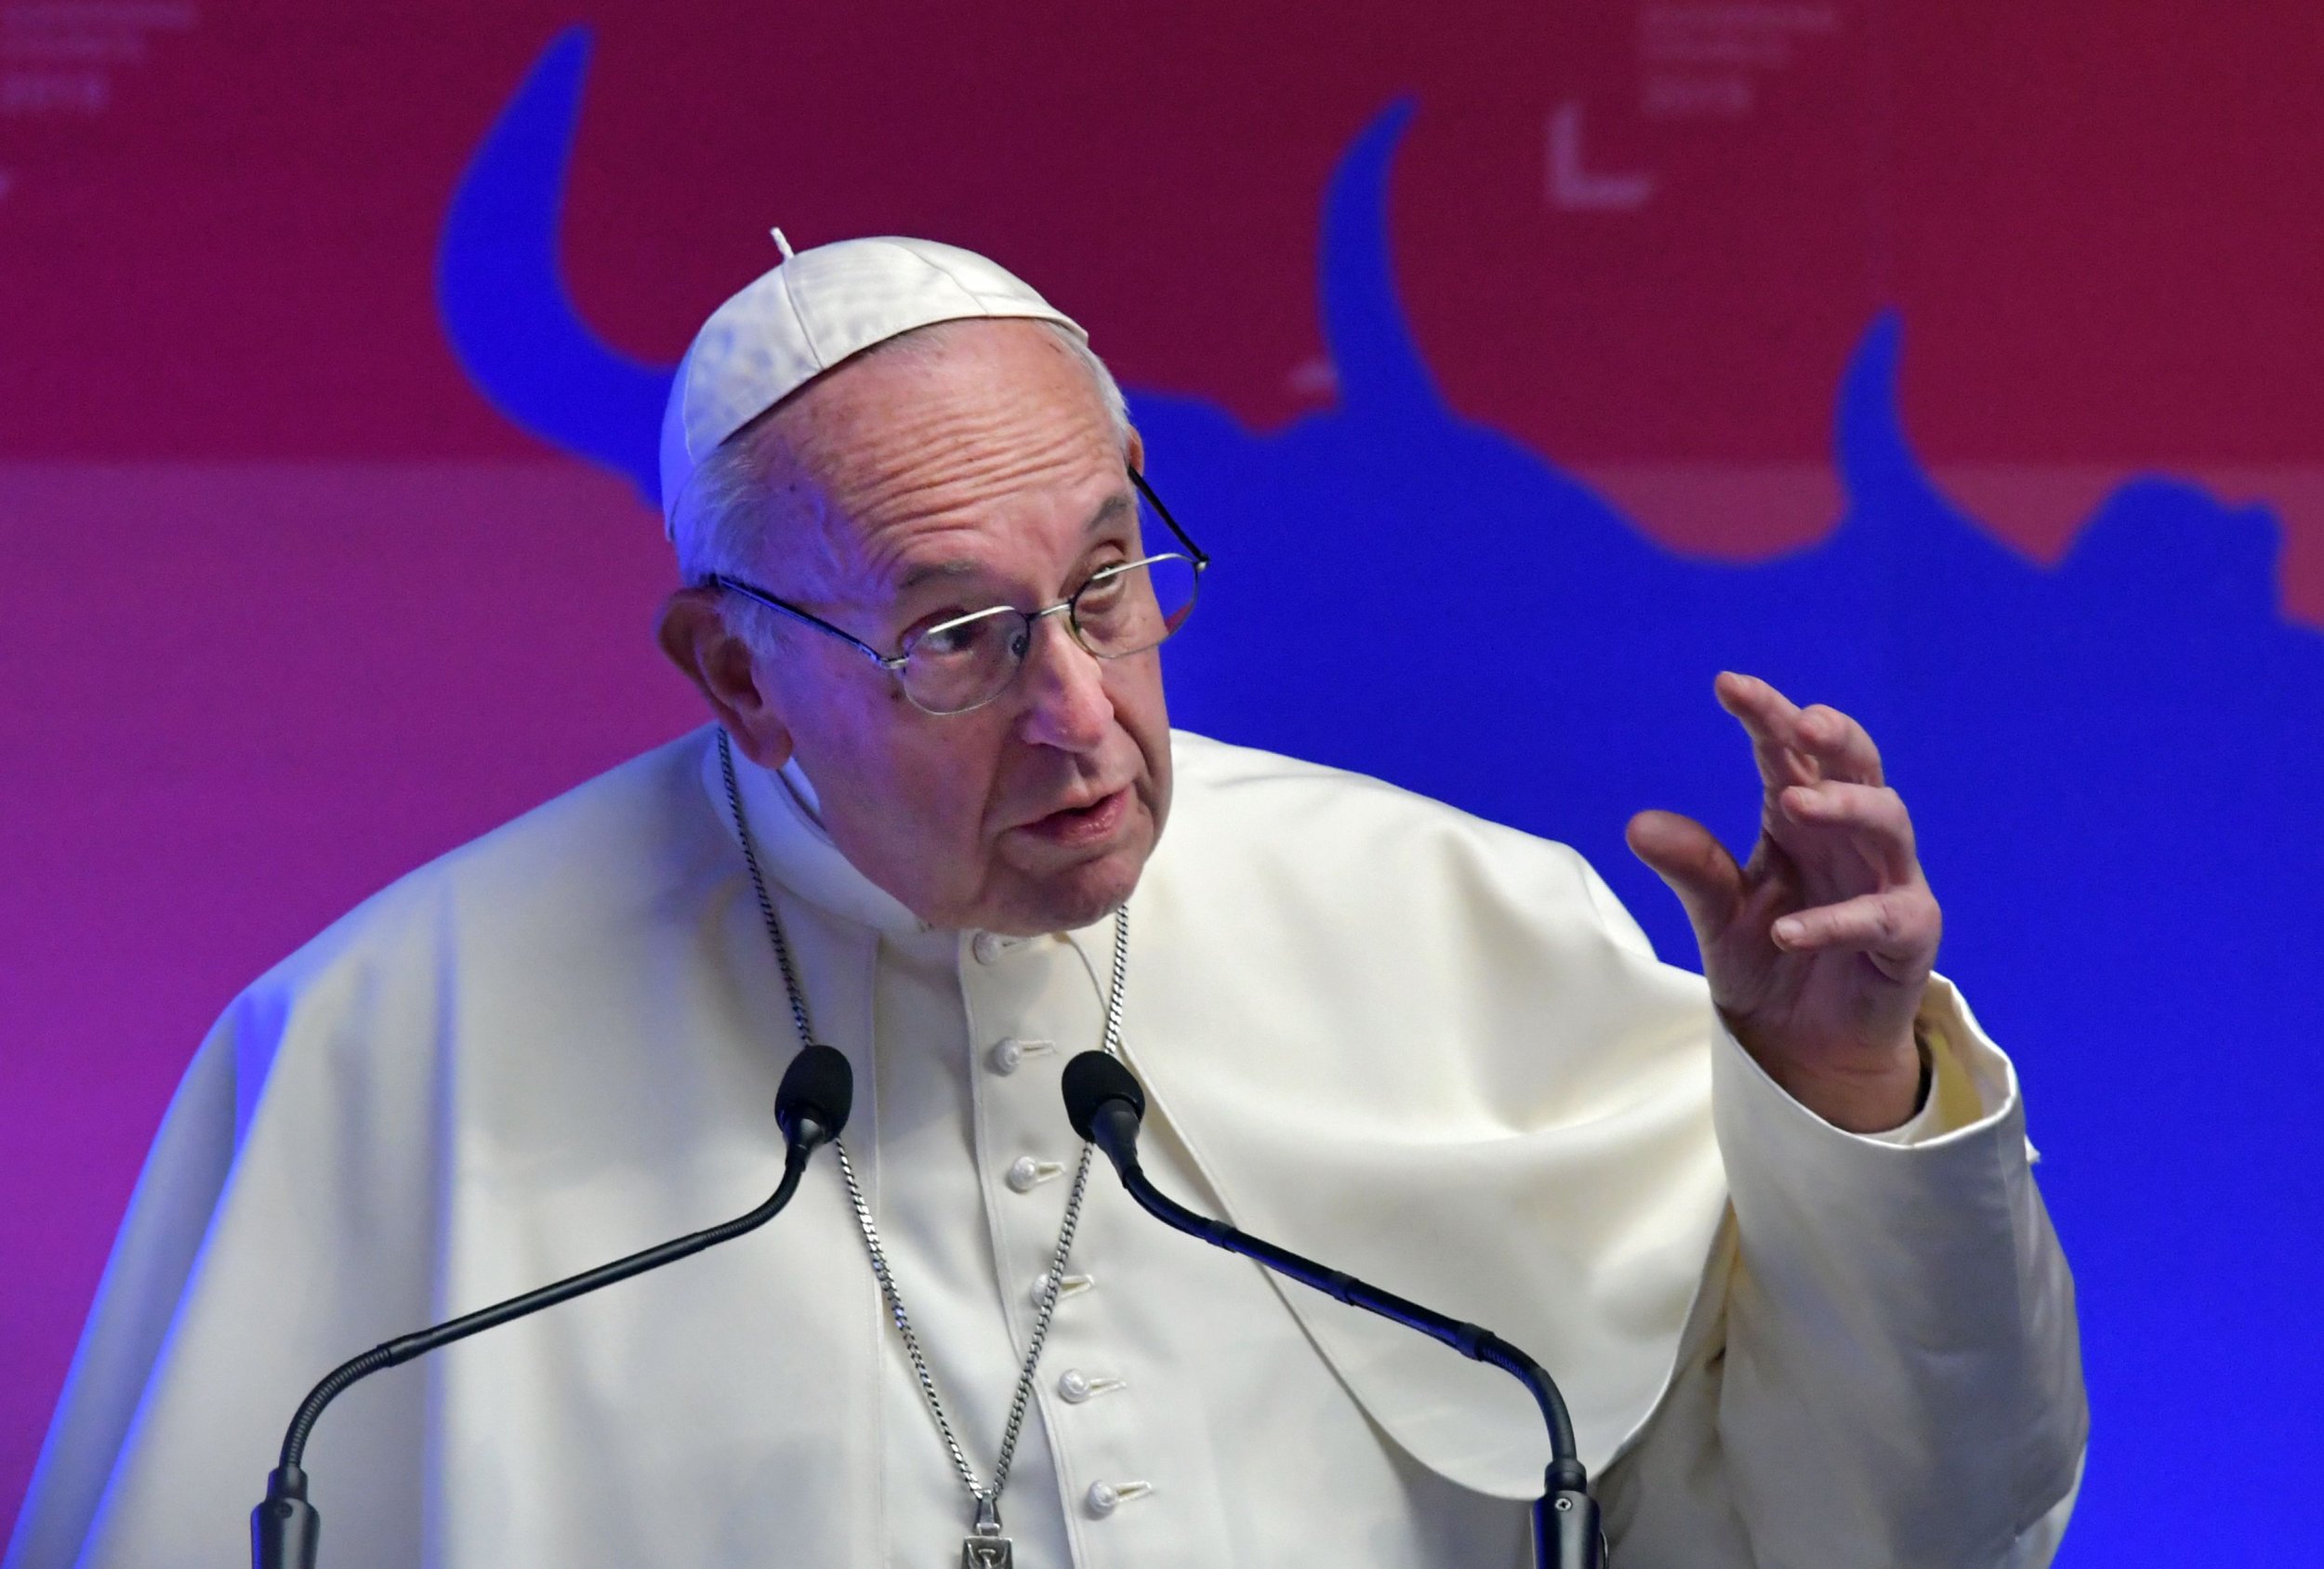 pope francis accusers linked to devil ahead of sexual abuse meeting